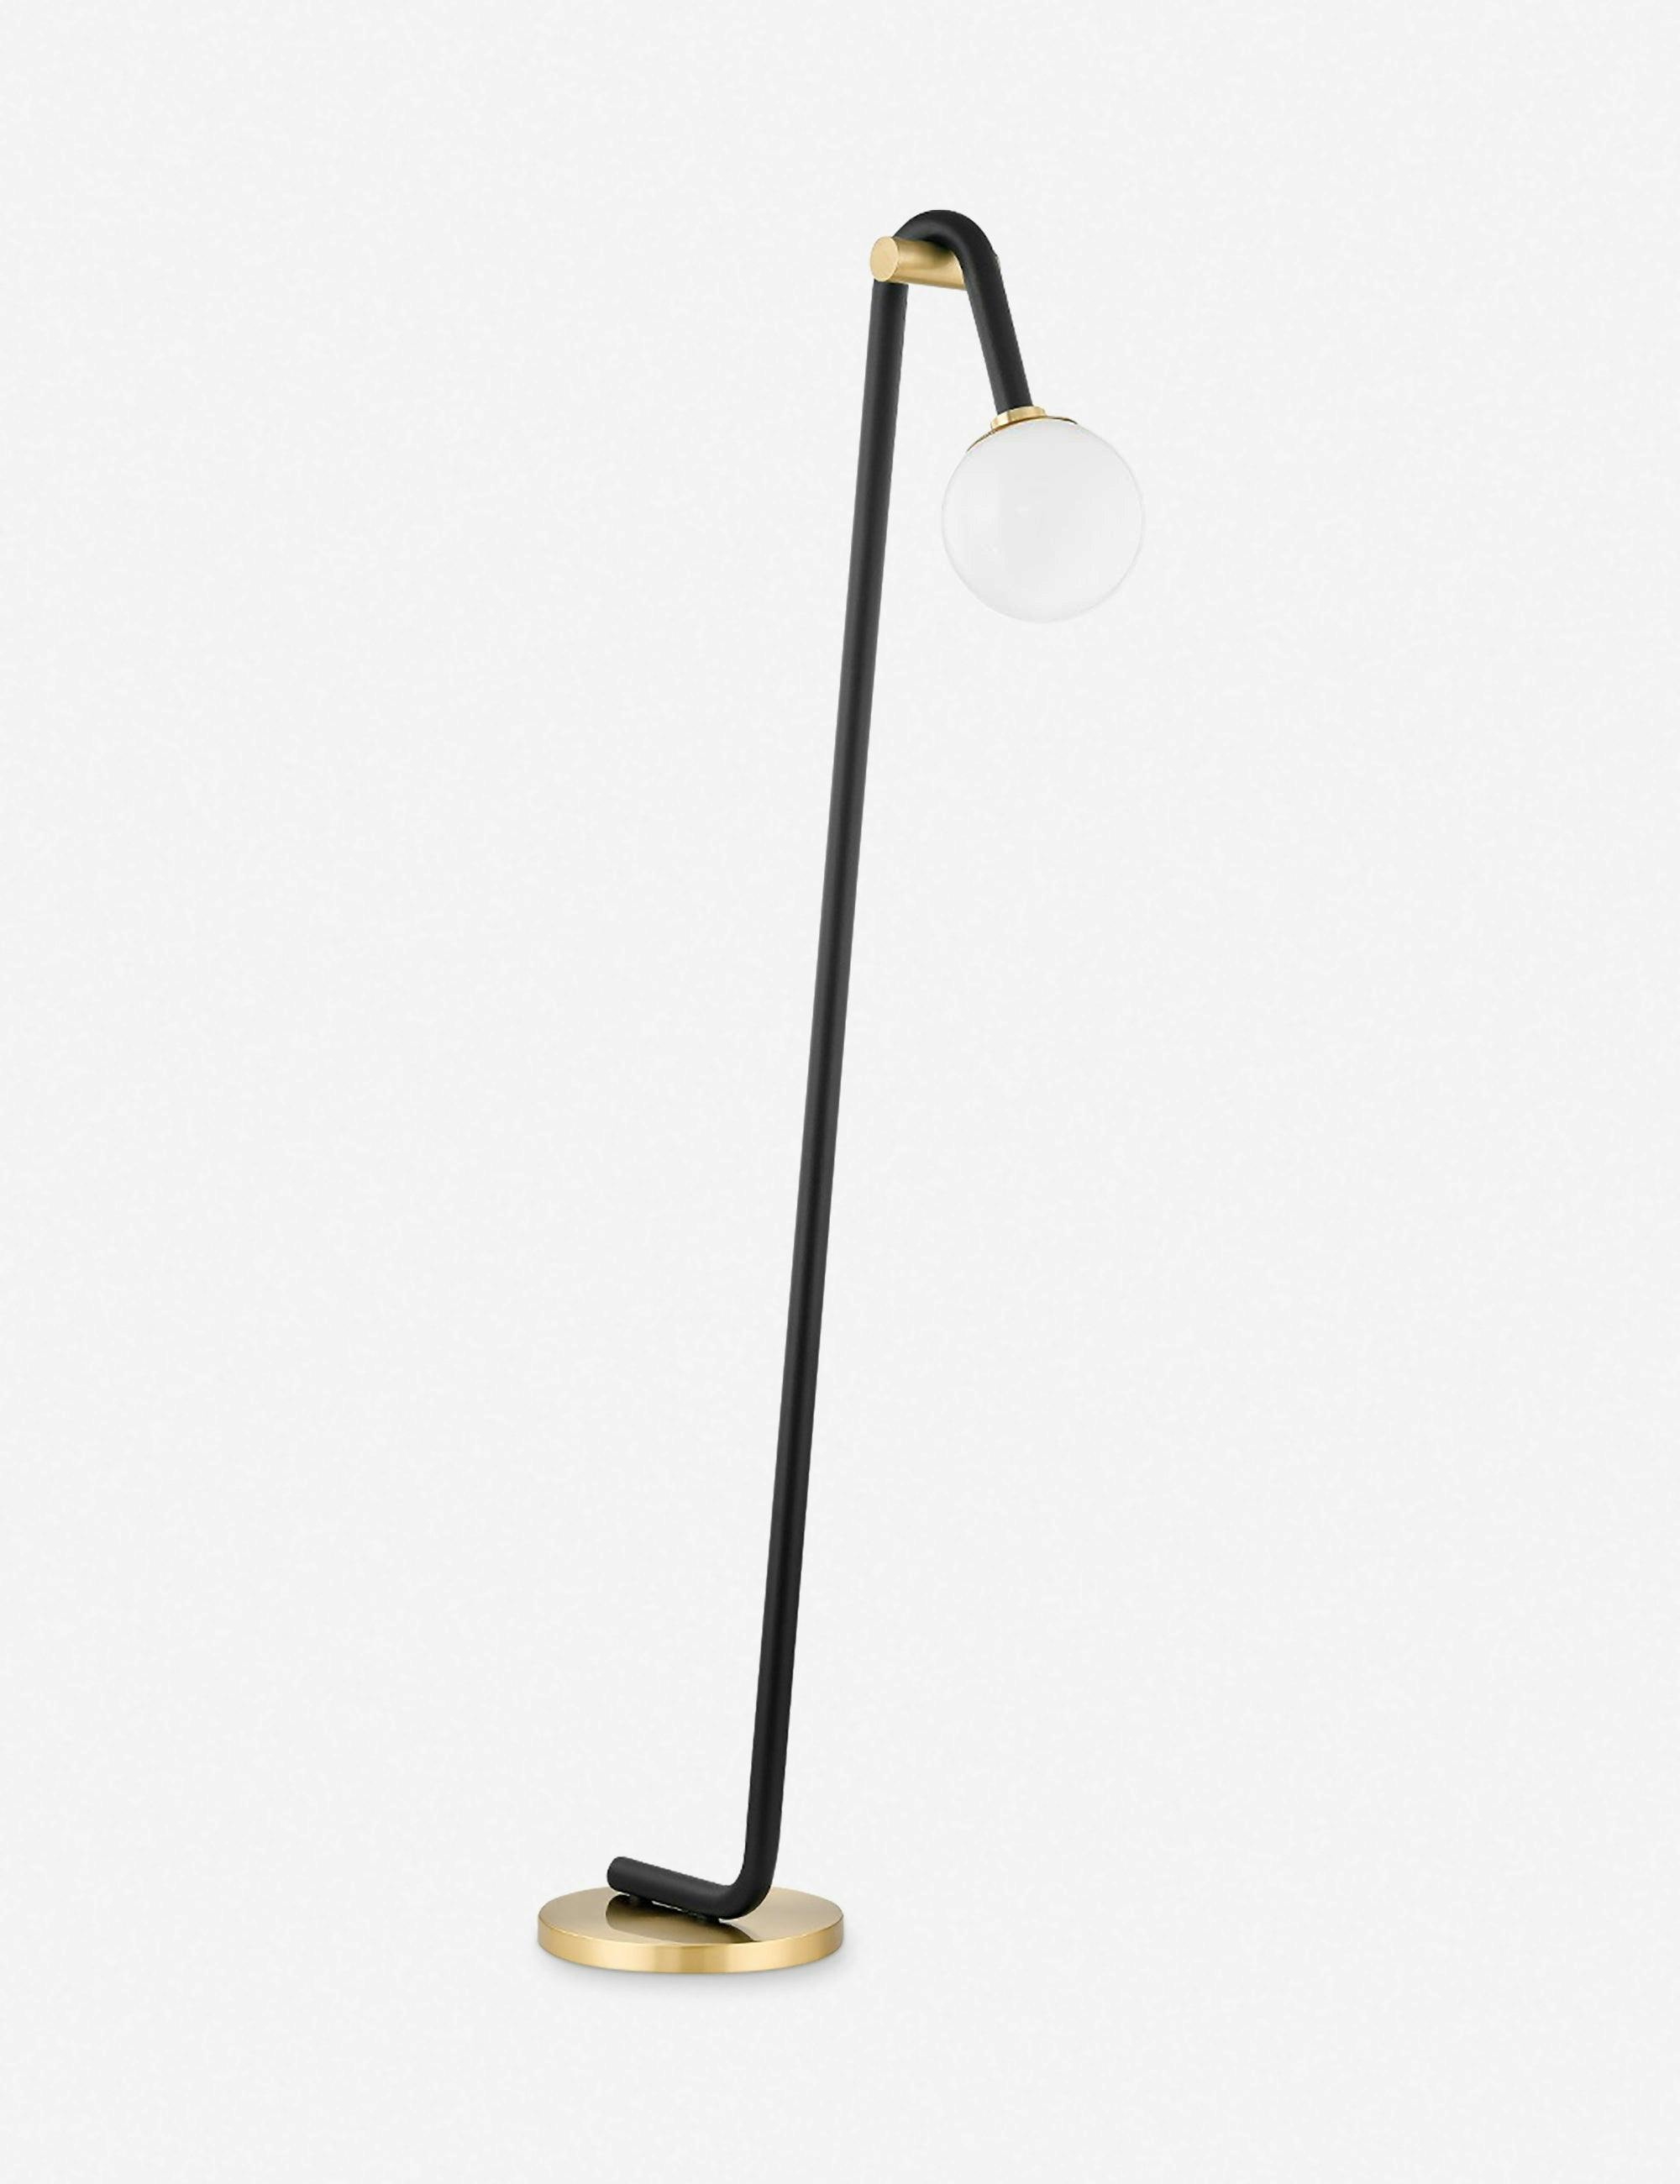 Arcadian Aged Brass & Black Adjustable Floor Lamp with Opal Shade